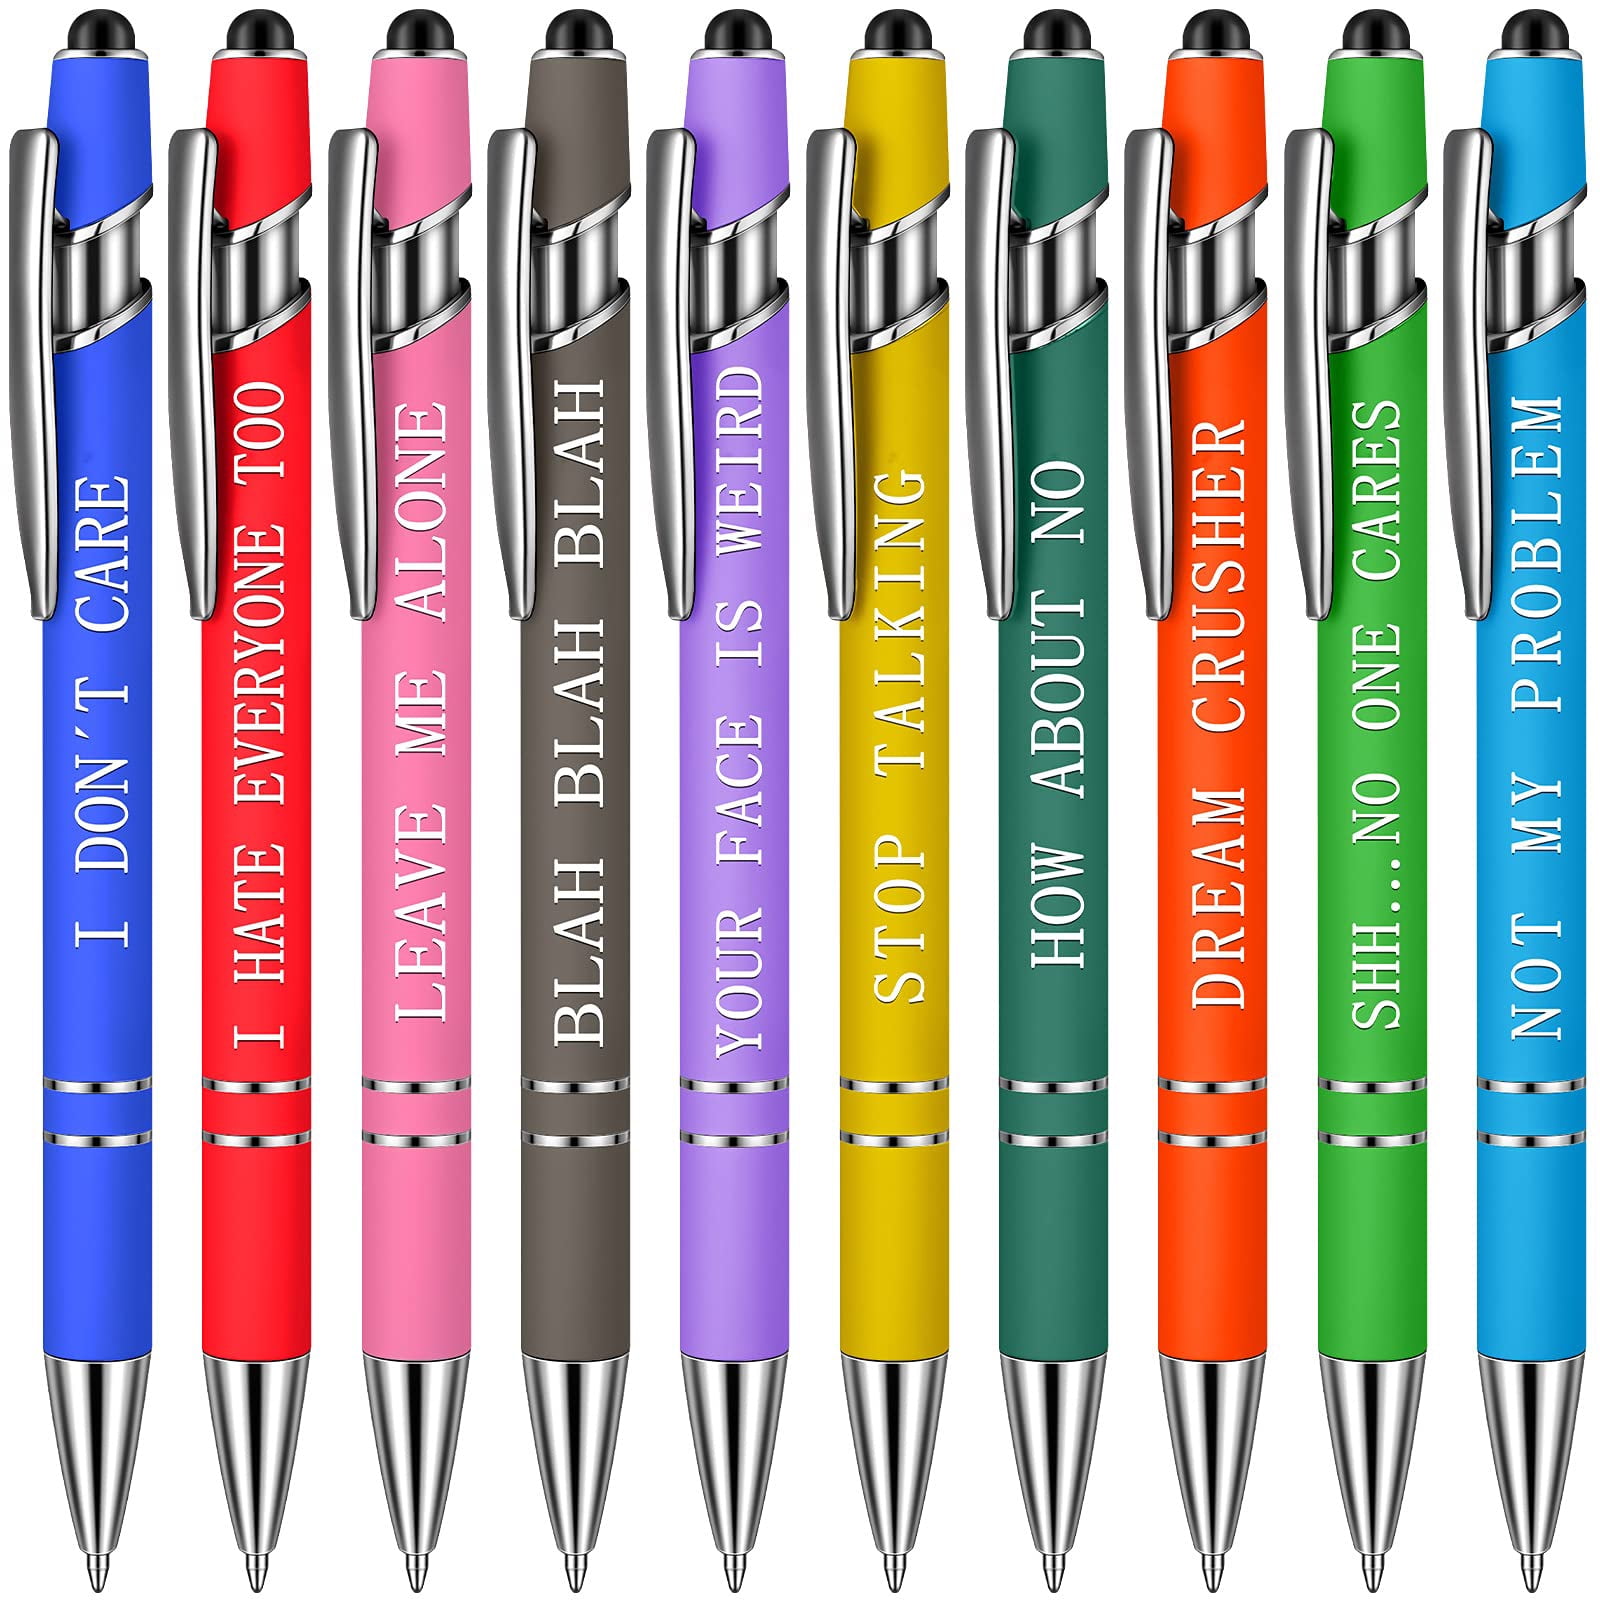 Funny Weekday Quotes Ballpoint Pen Set, Funny Pen ,funny Number